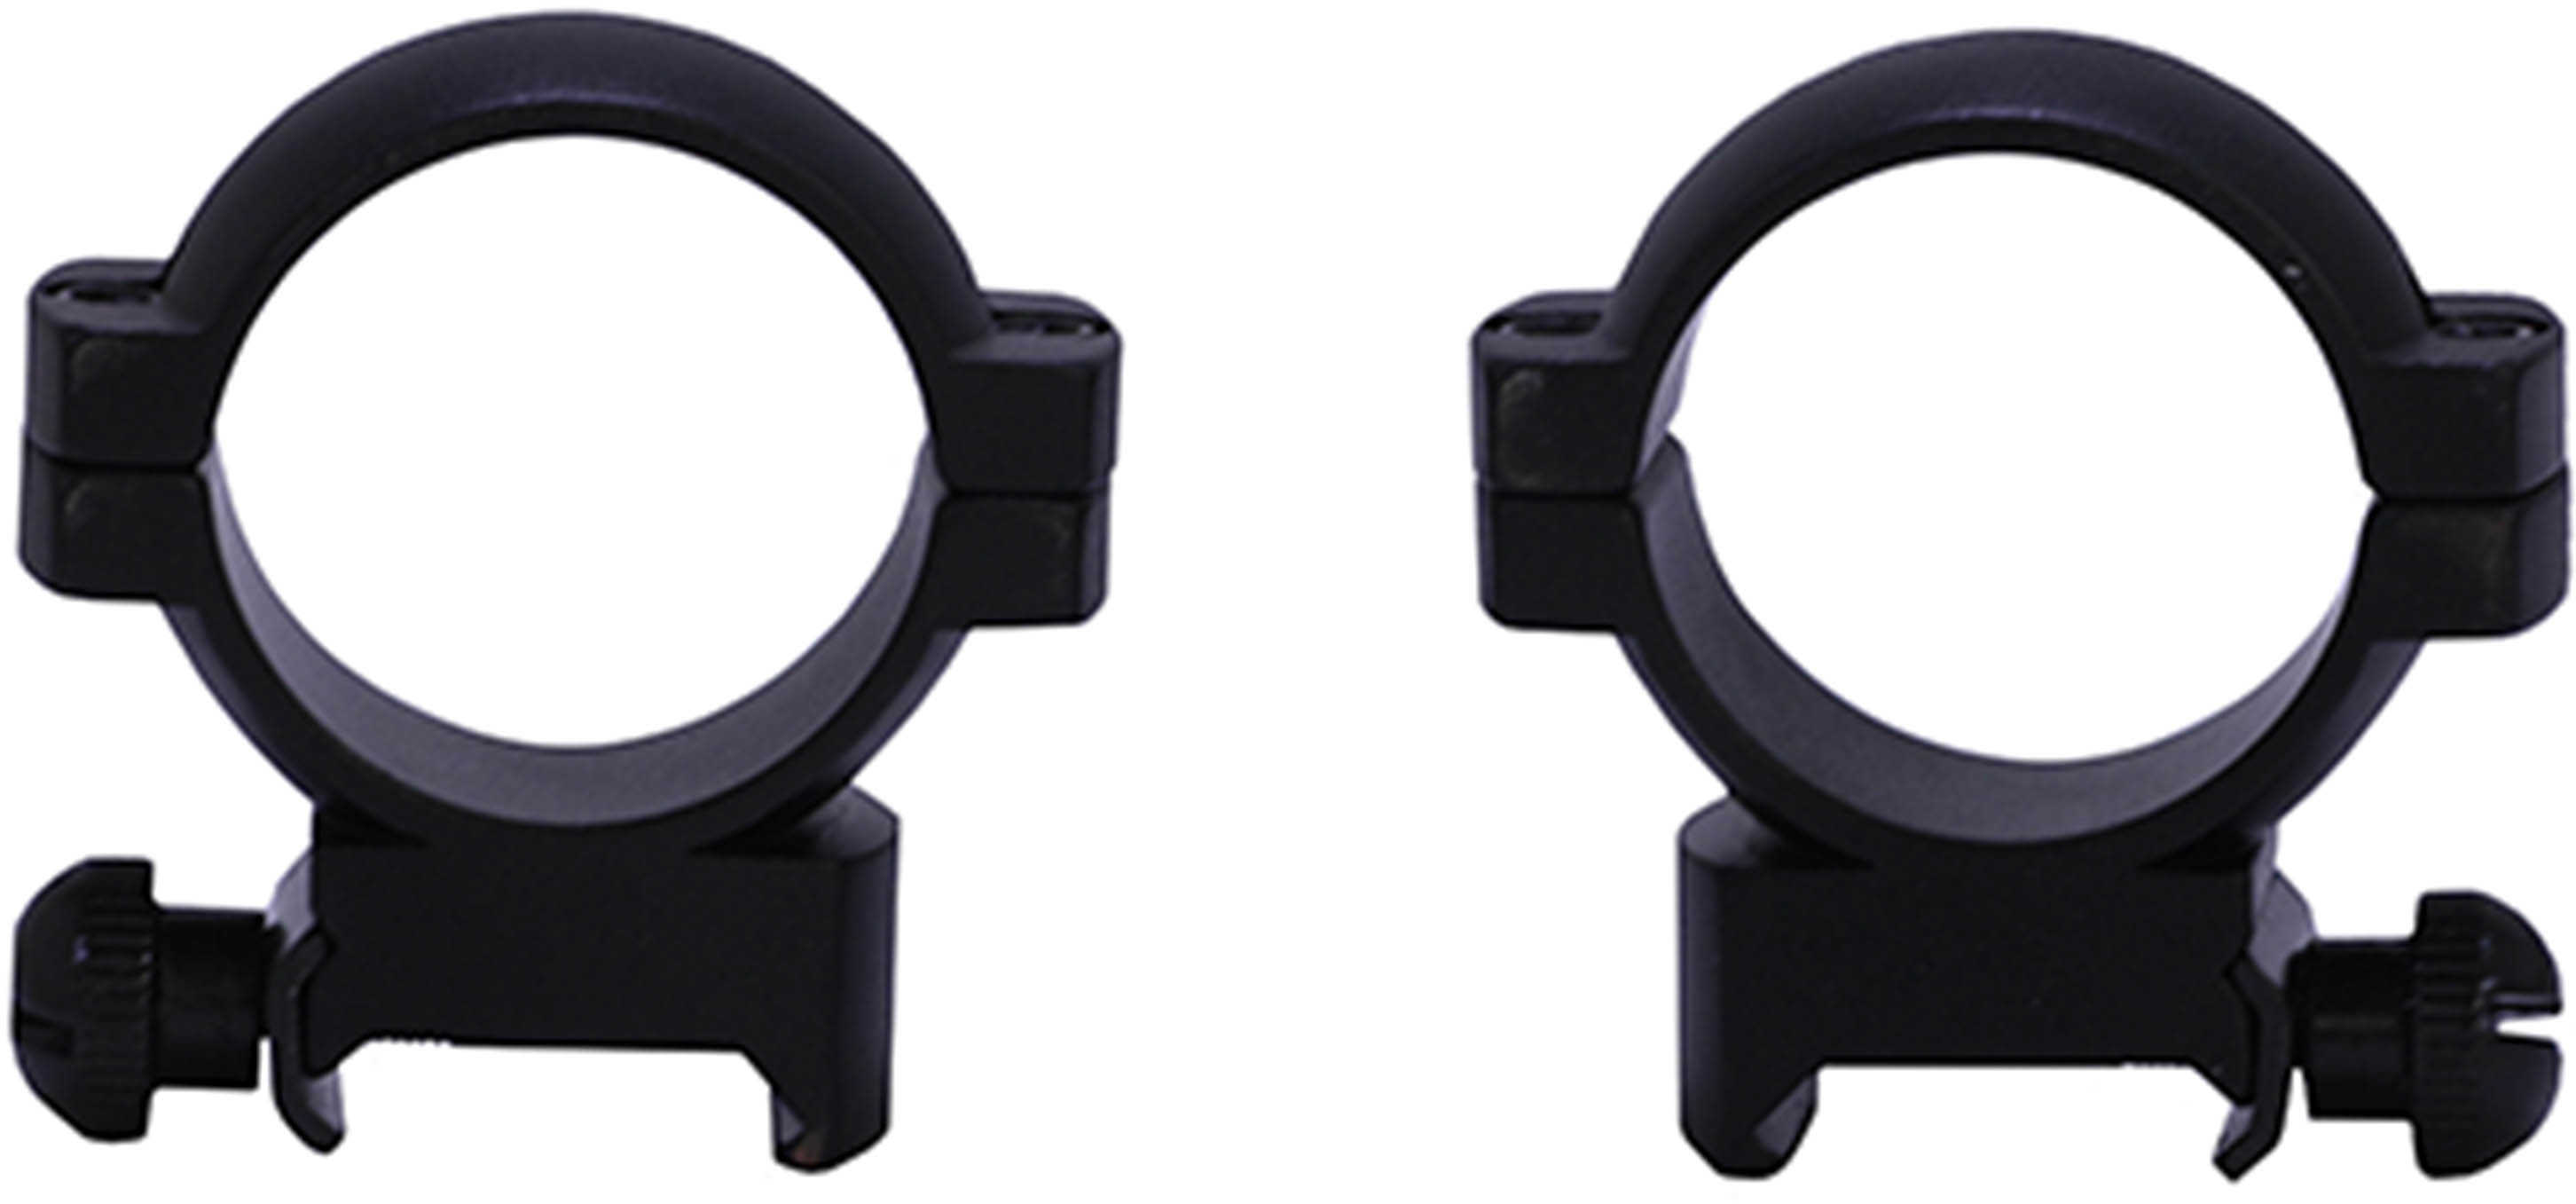 Weaver Simmons 30MM Aluminum Rings With Matte Black Finish Md: 49175